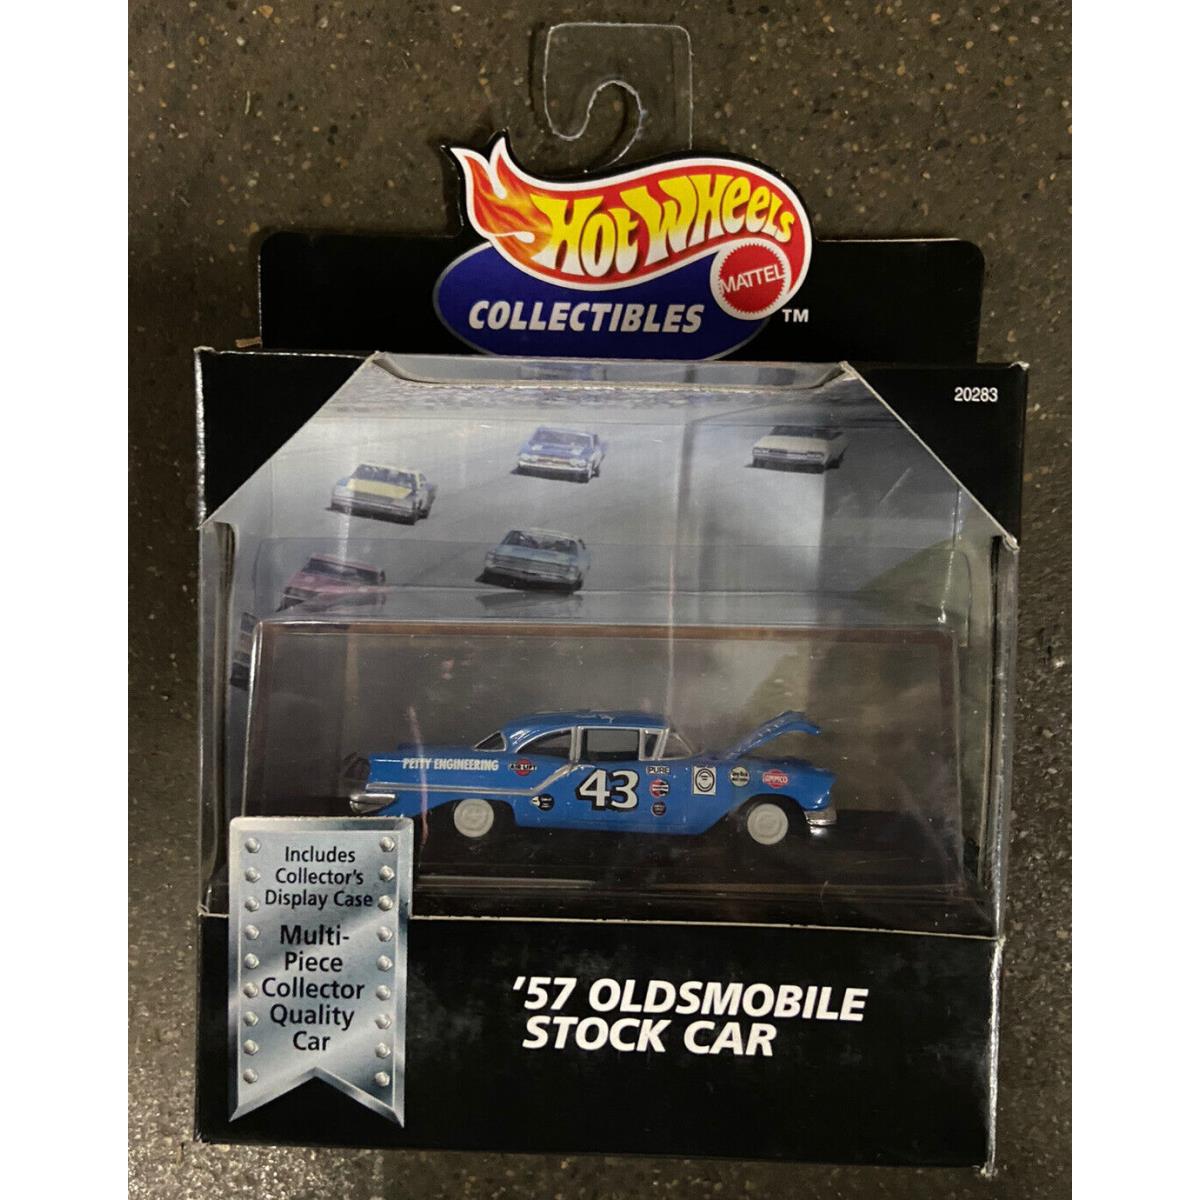 1998 Hot Wheels Adult Collectibles Multi Piece Quality `57 Olds Stock Car Petty